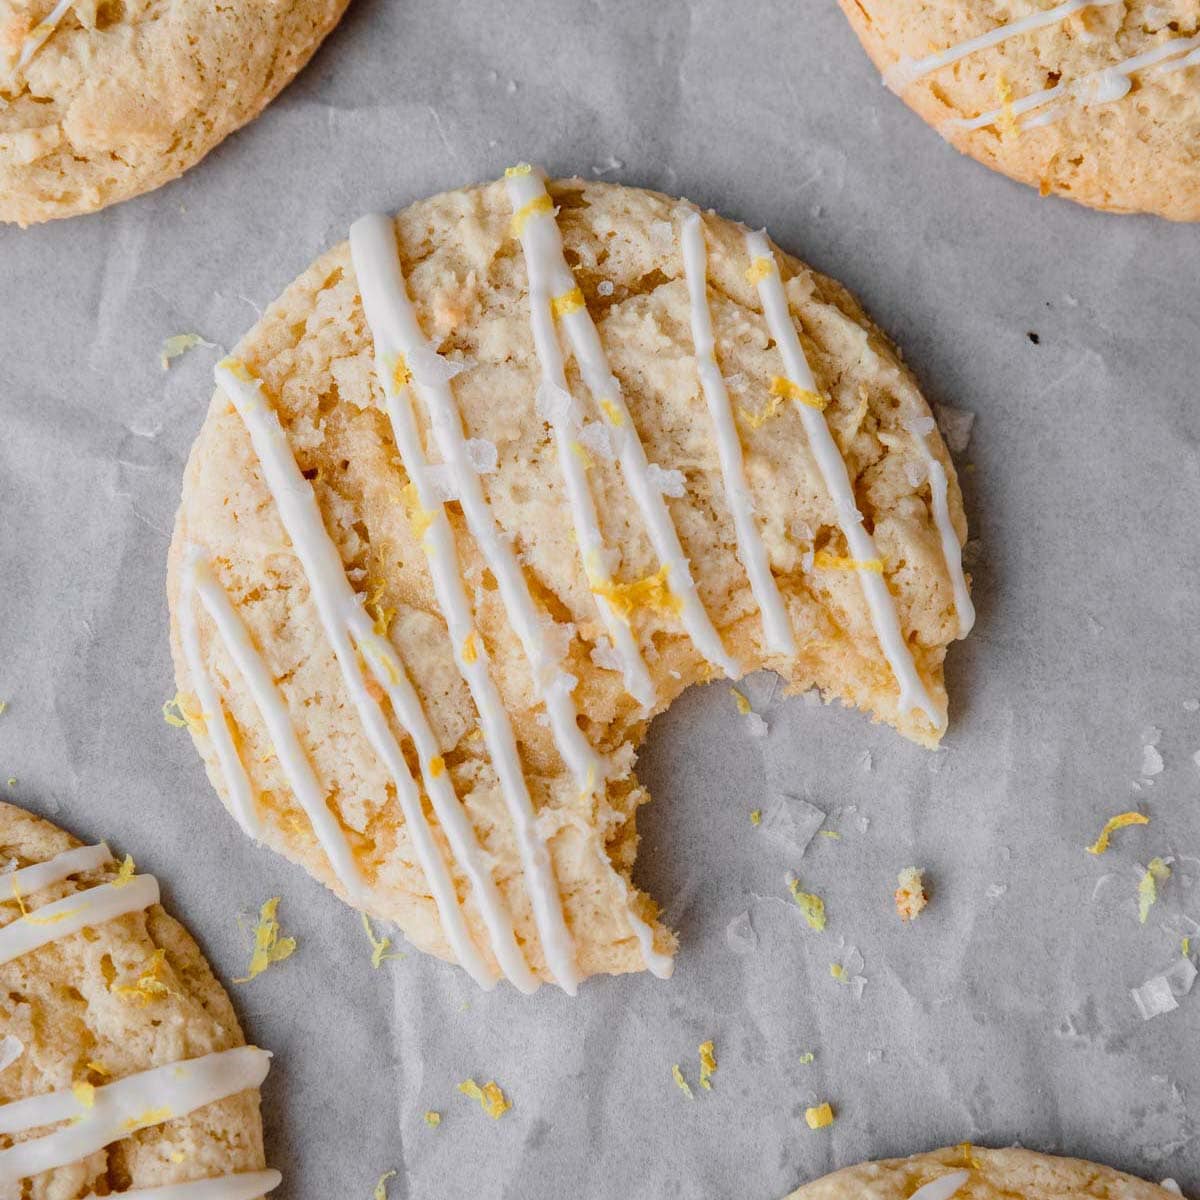 Lemon Ricotta Cookie topped with lemon frosting that has a bite taken out of it.